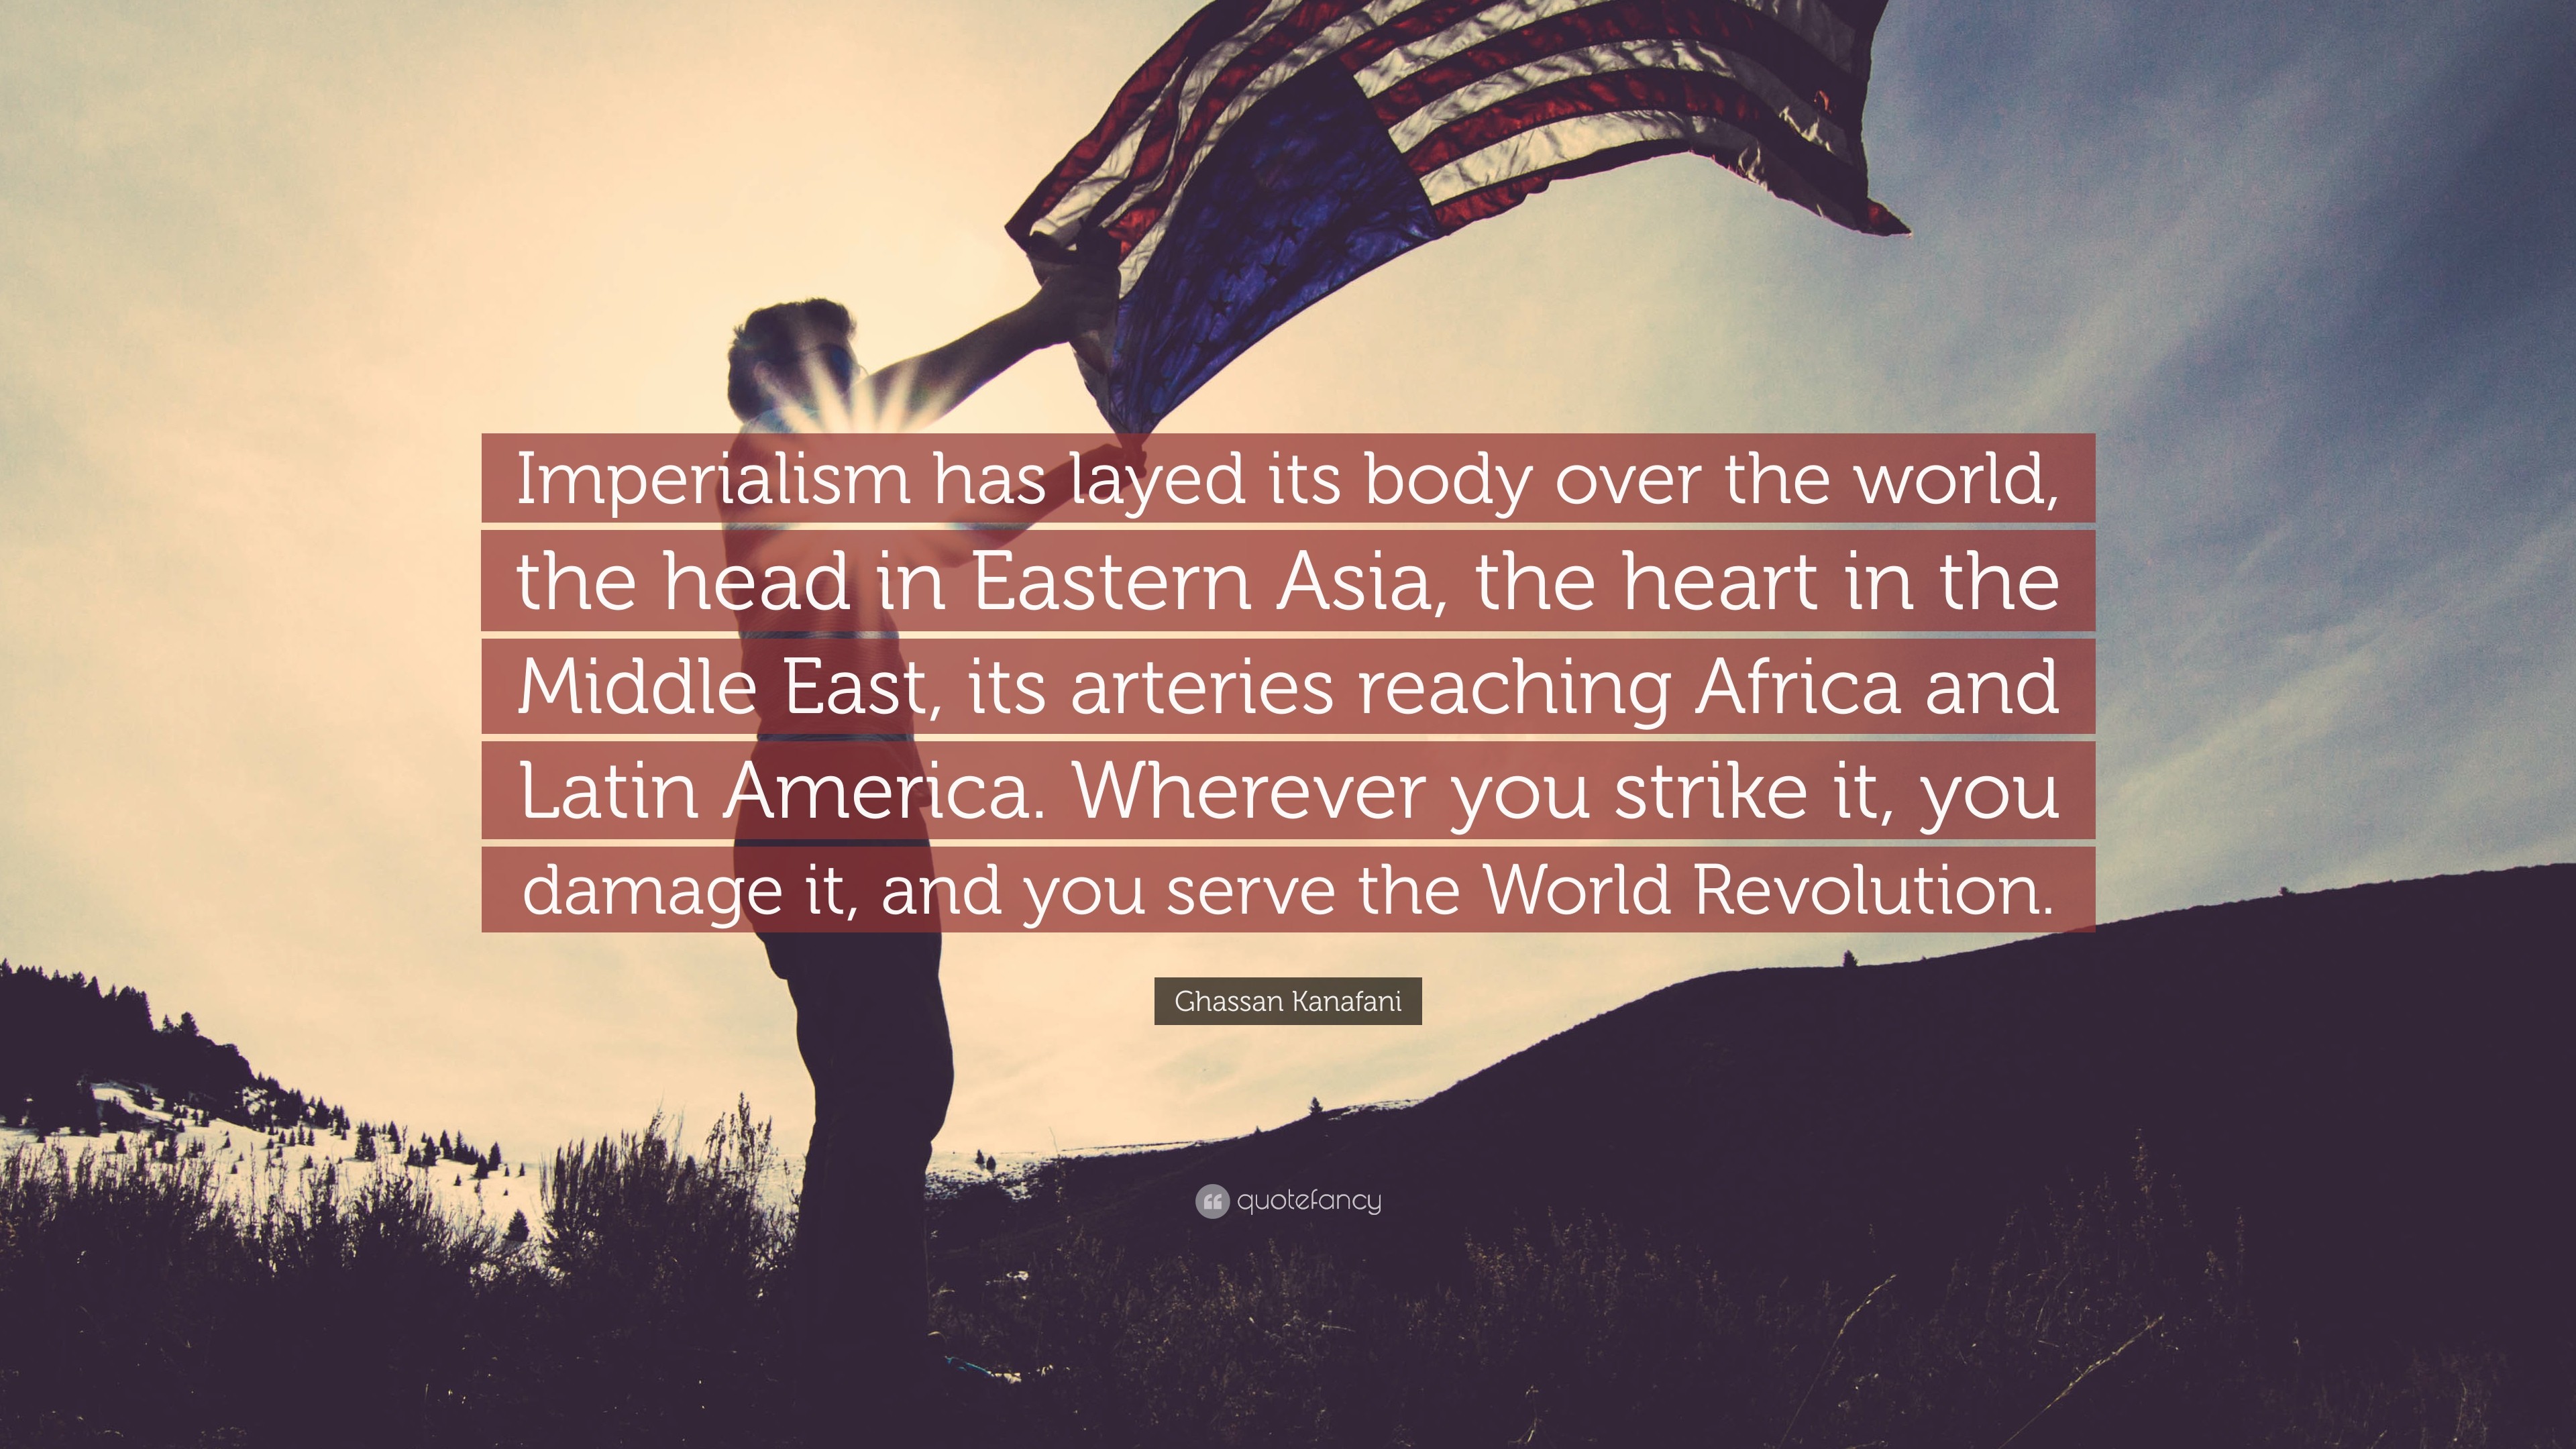 3840x2160 Ghassan Kanafani Quote: “Imperialism has layed its body over the world, the  head